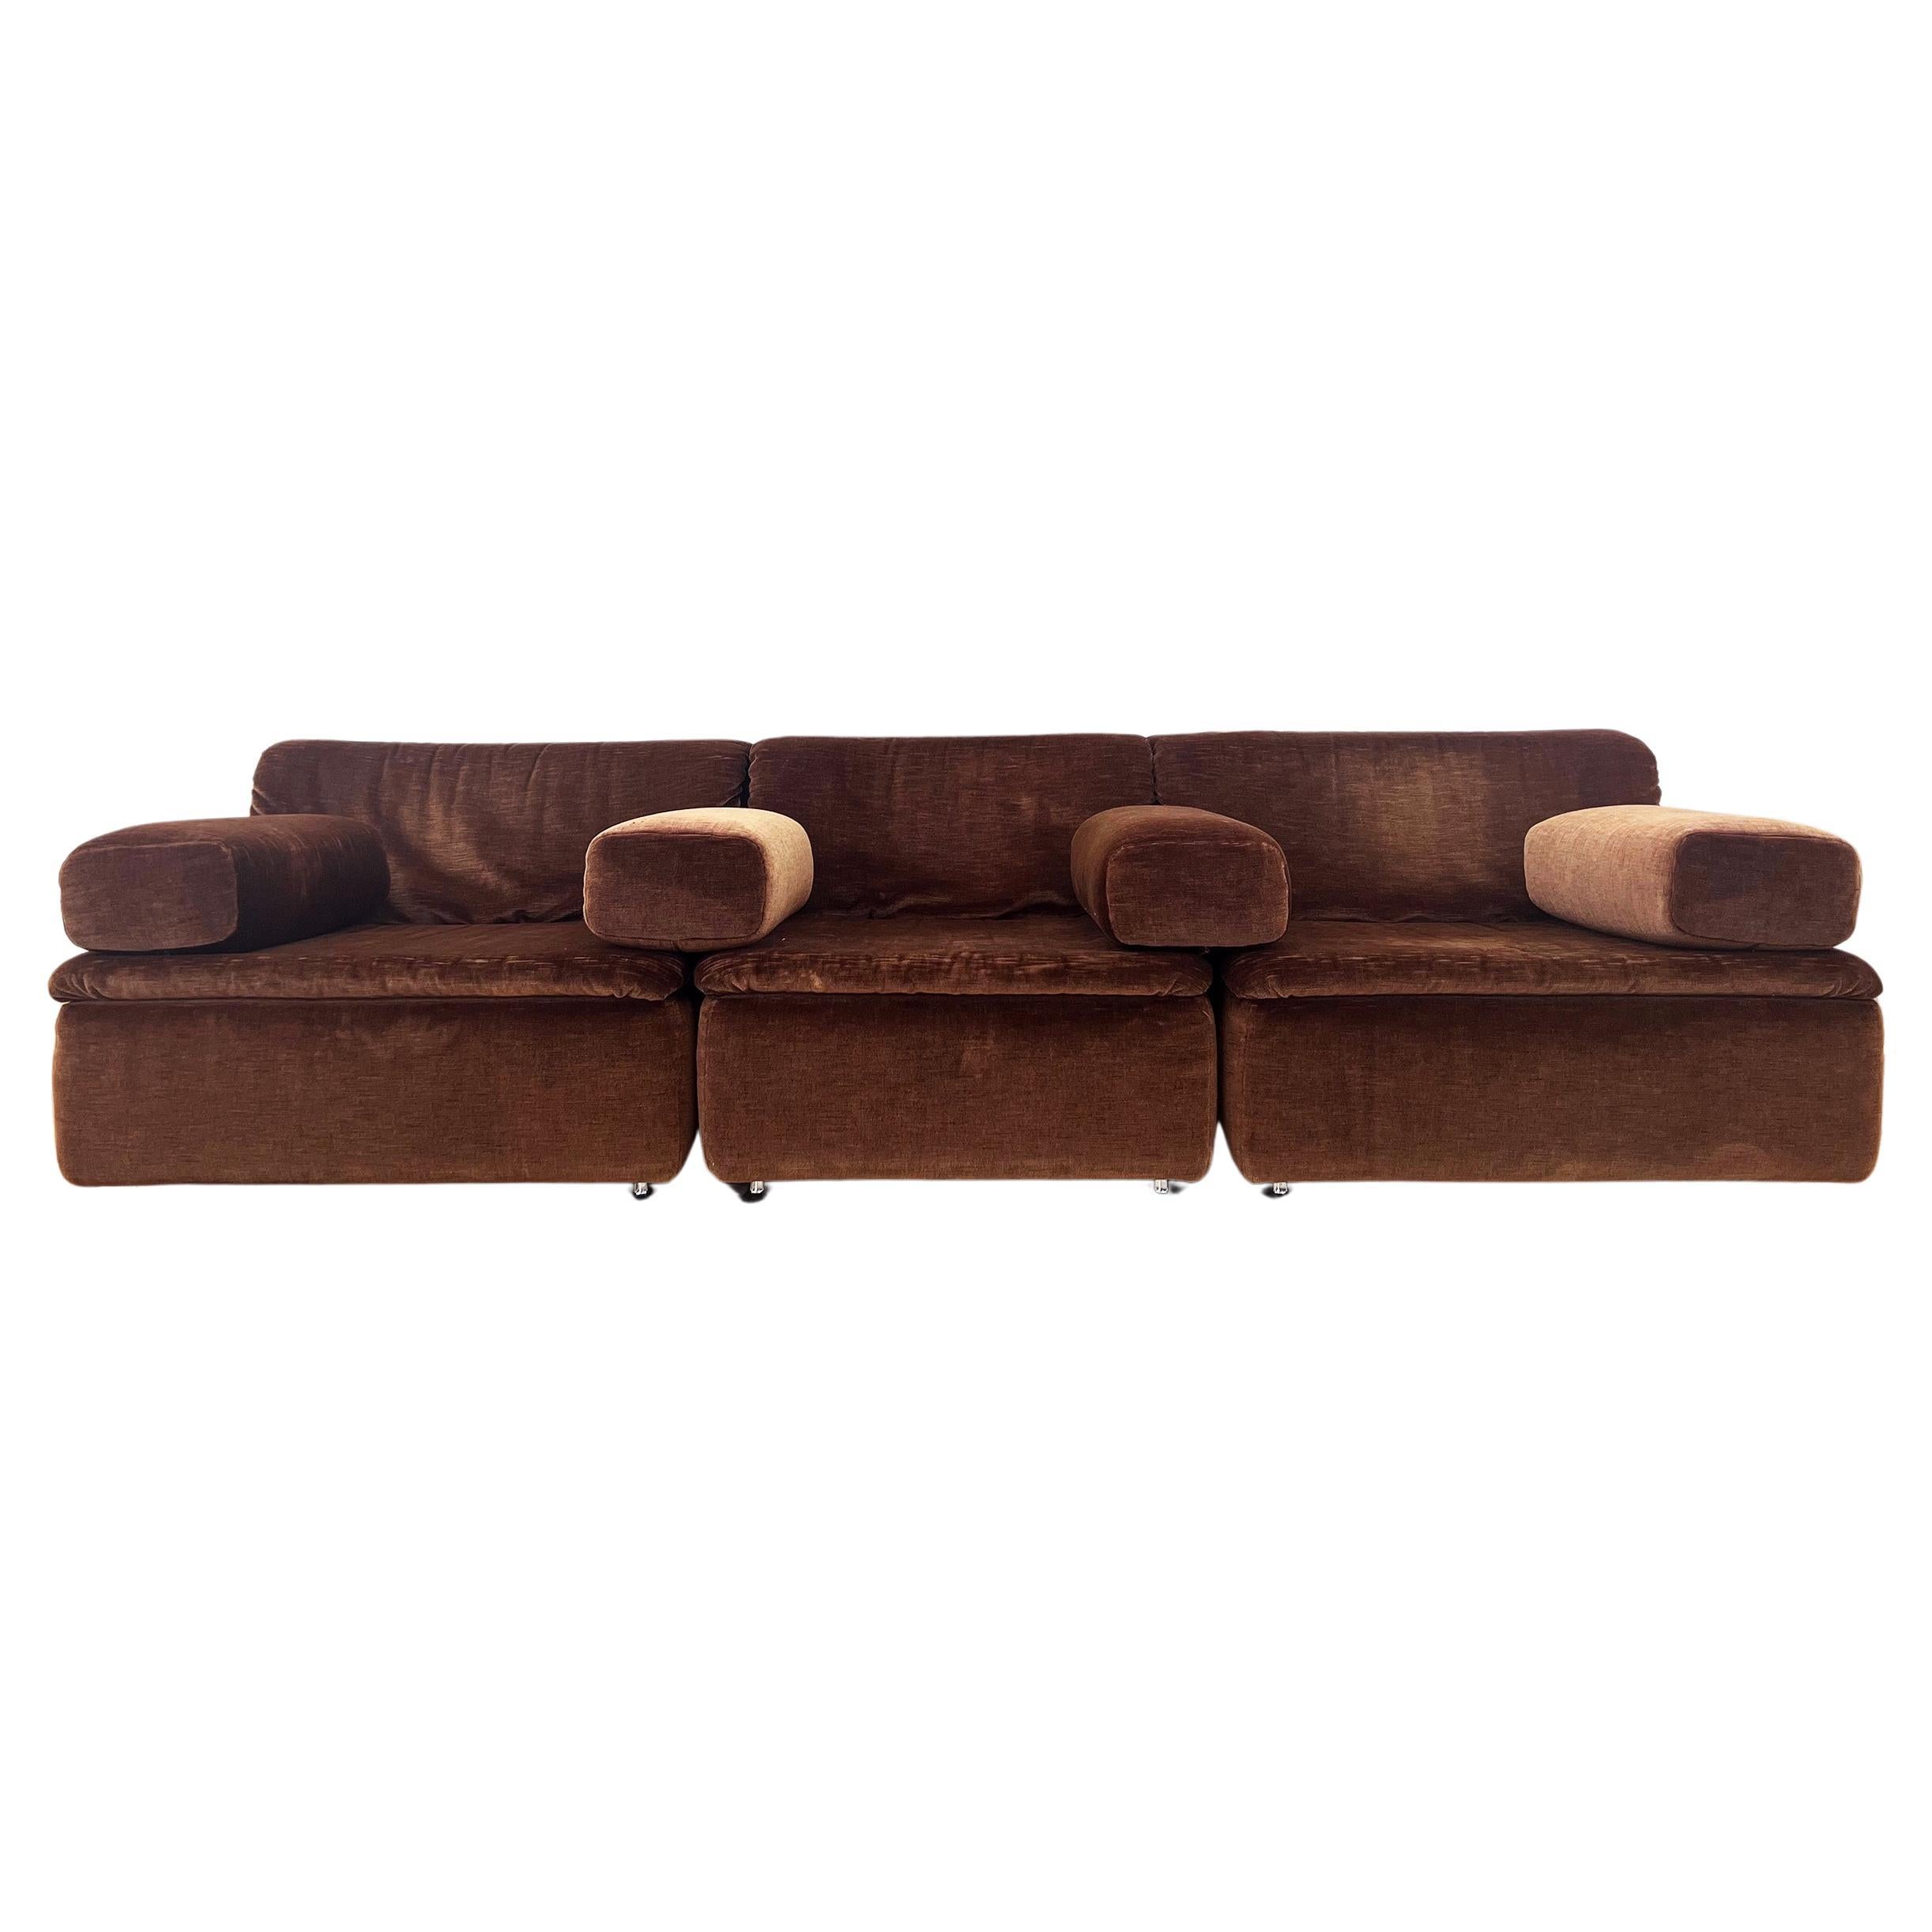 Very cool three piece modular Sofa sectional which can also be used as three separate lounge chairs. Feature 4 very cool metal feet on the bottom of each piece. Attributed to Mario Bellini. Iconic style. Upholstered in brown velour, which feels like